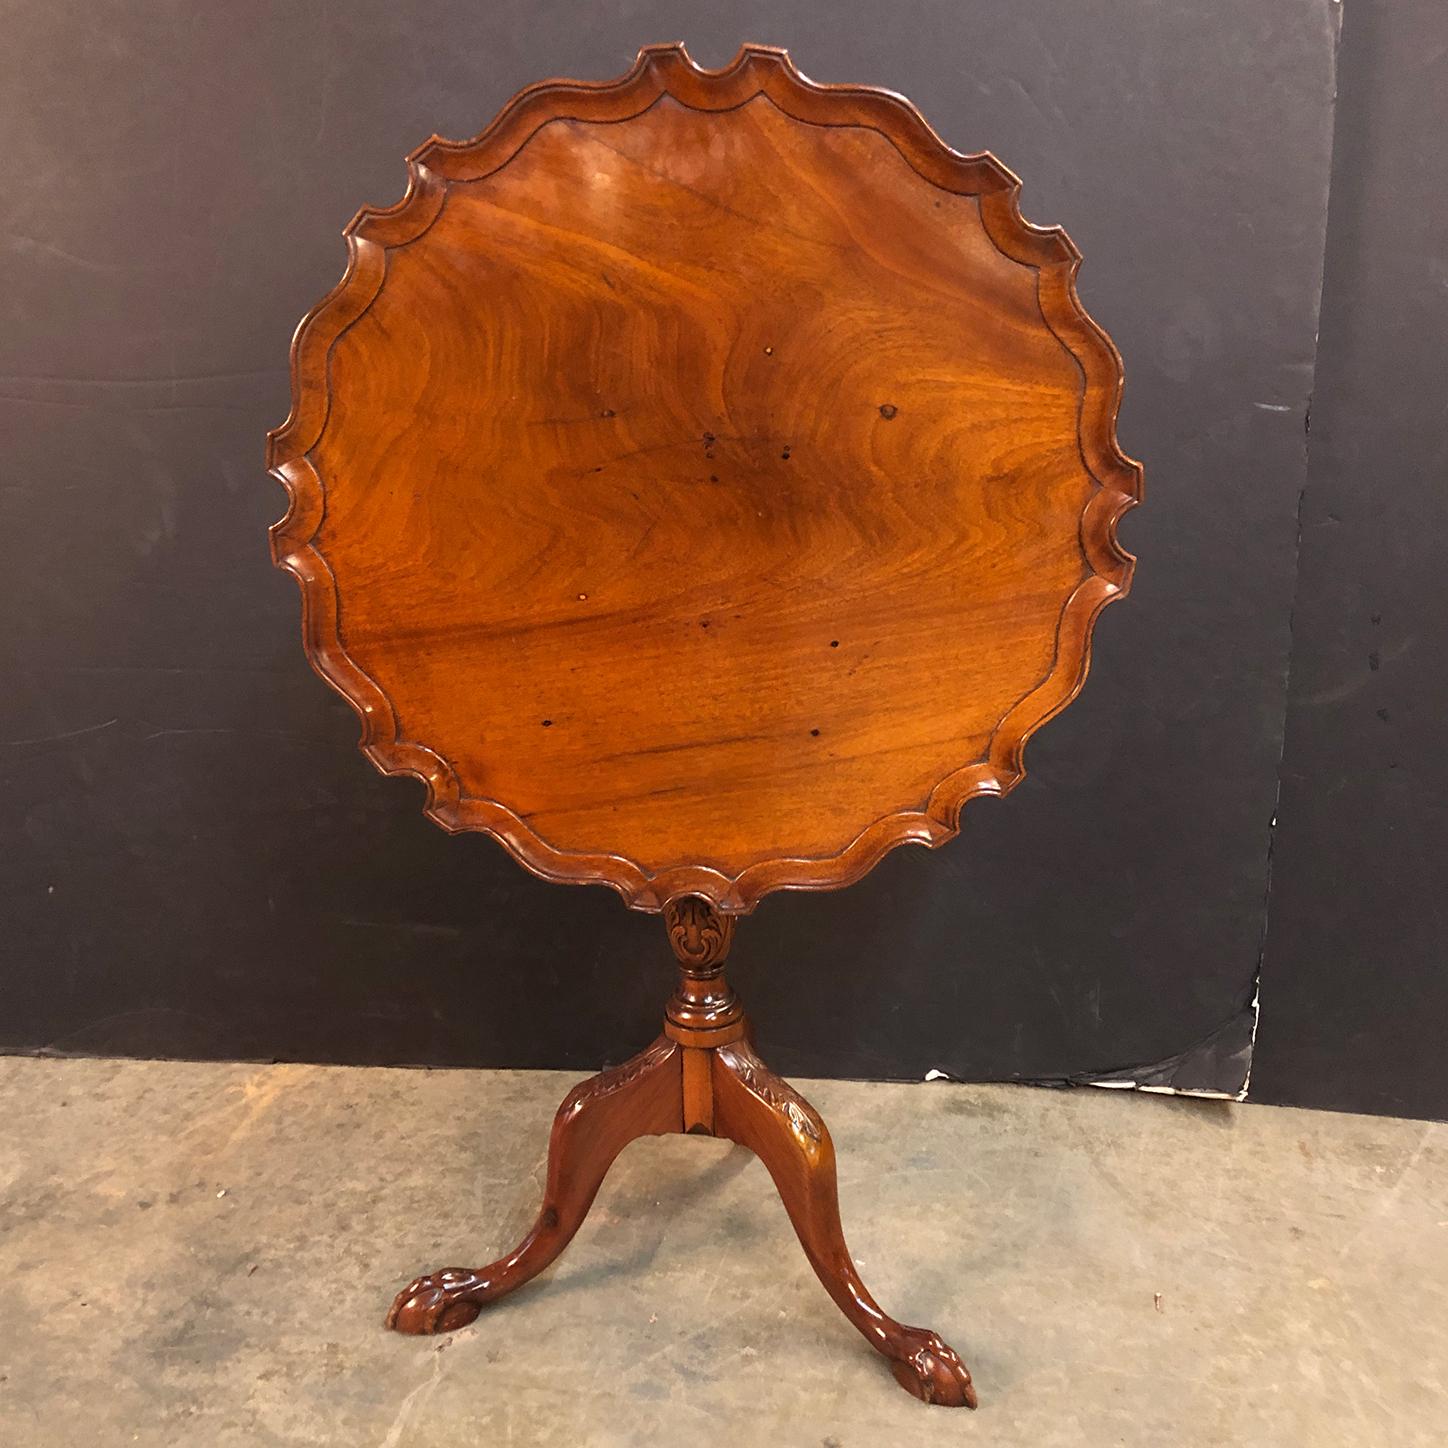 A fine George II mahogany carved tilt-top pie crust side table with a birdcage for support, turned pedestal acanthus carved base with cabriole legs and ball and claw feet.